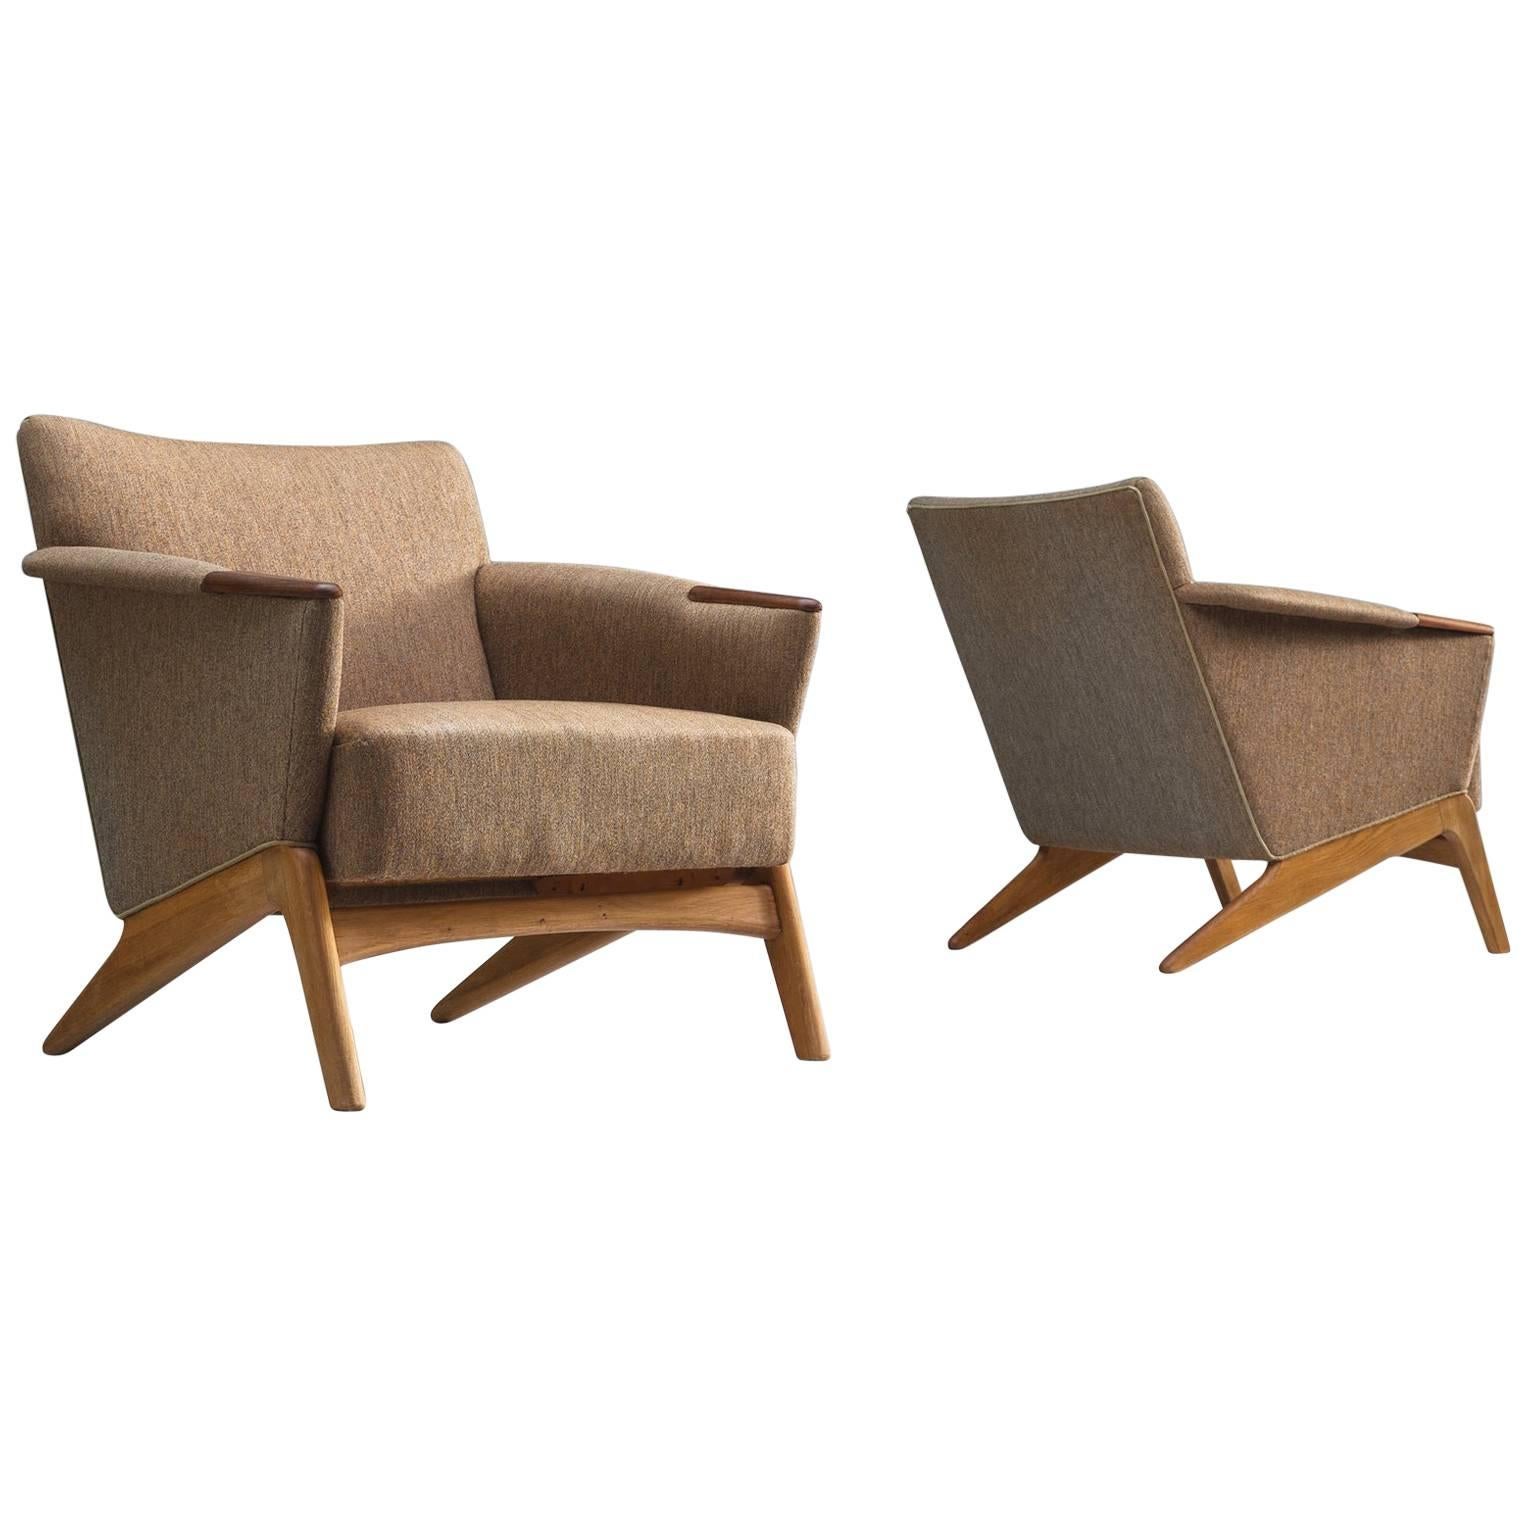 Pair of Danish Easy Chairs in Grey Fabric and Teak